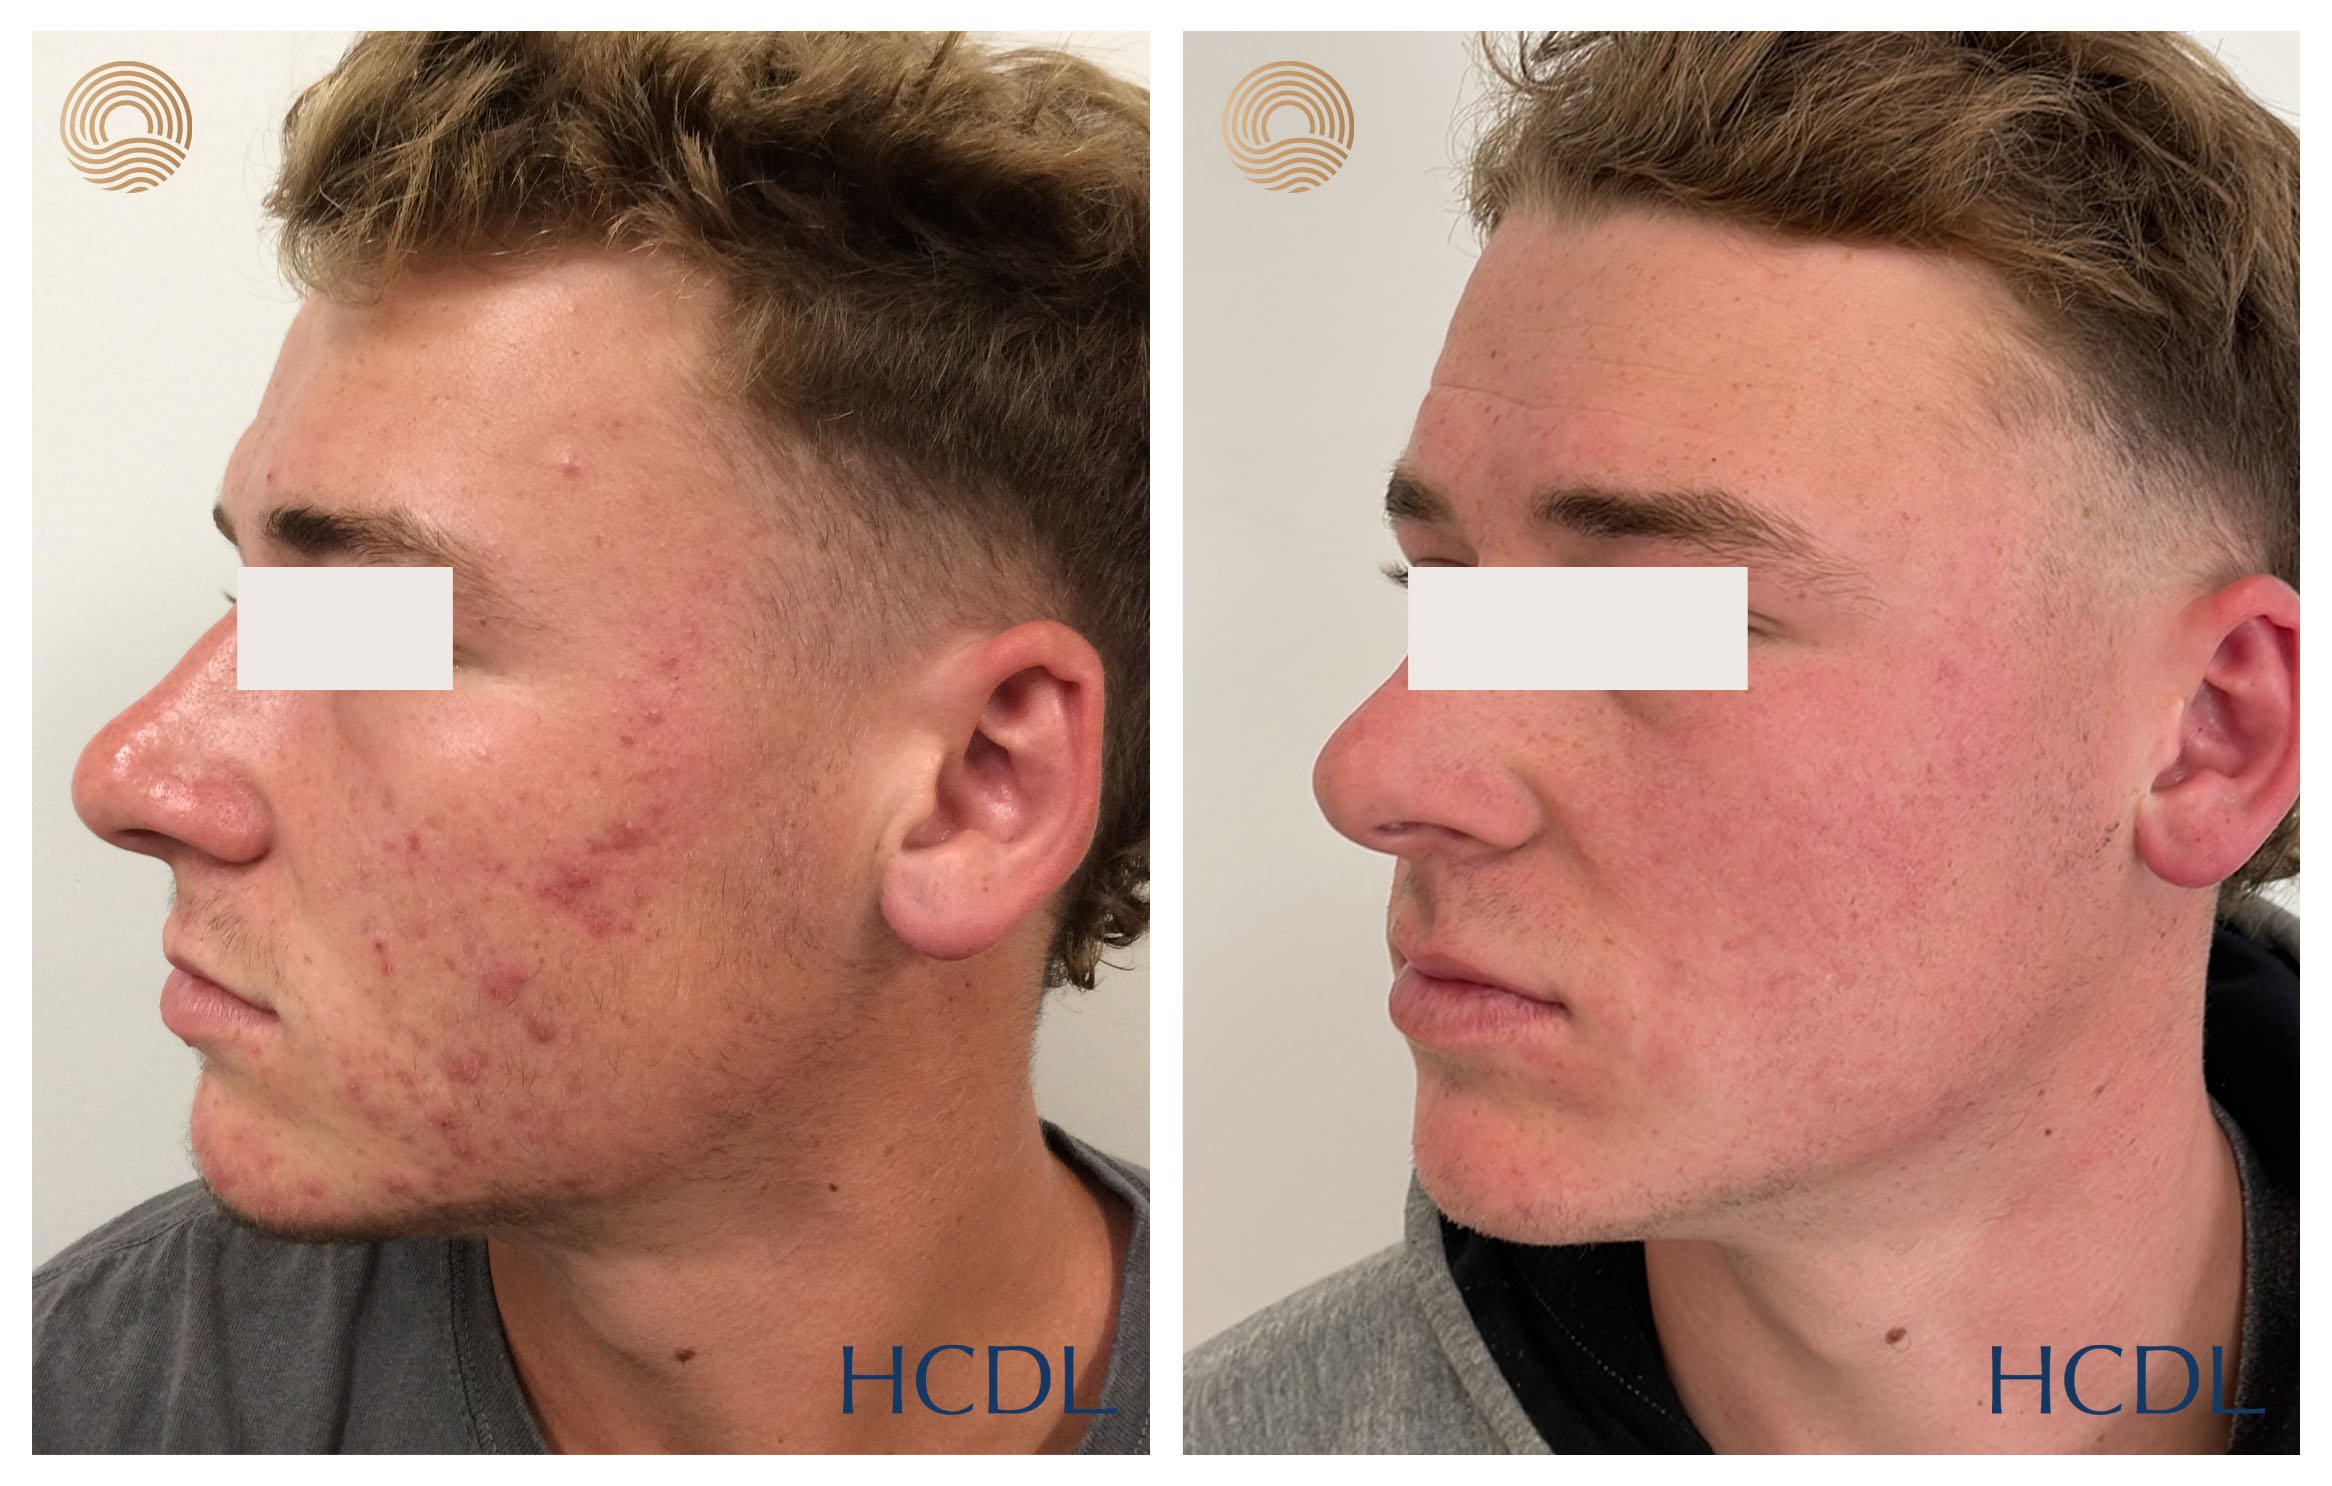 Combined medical and laser management after 6 months